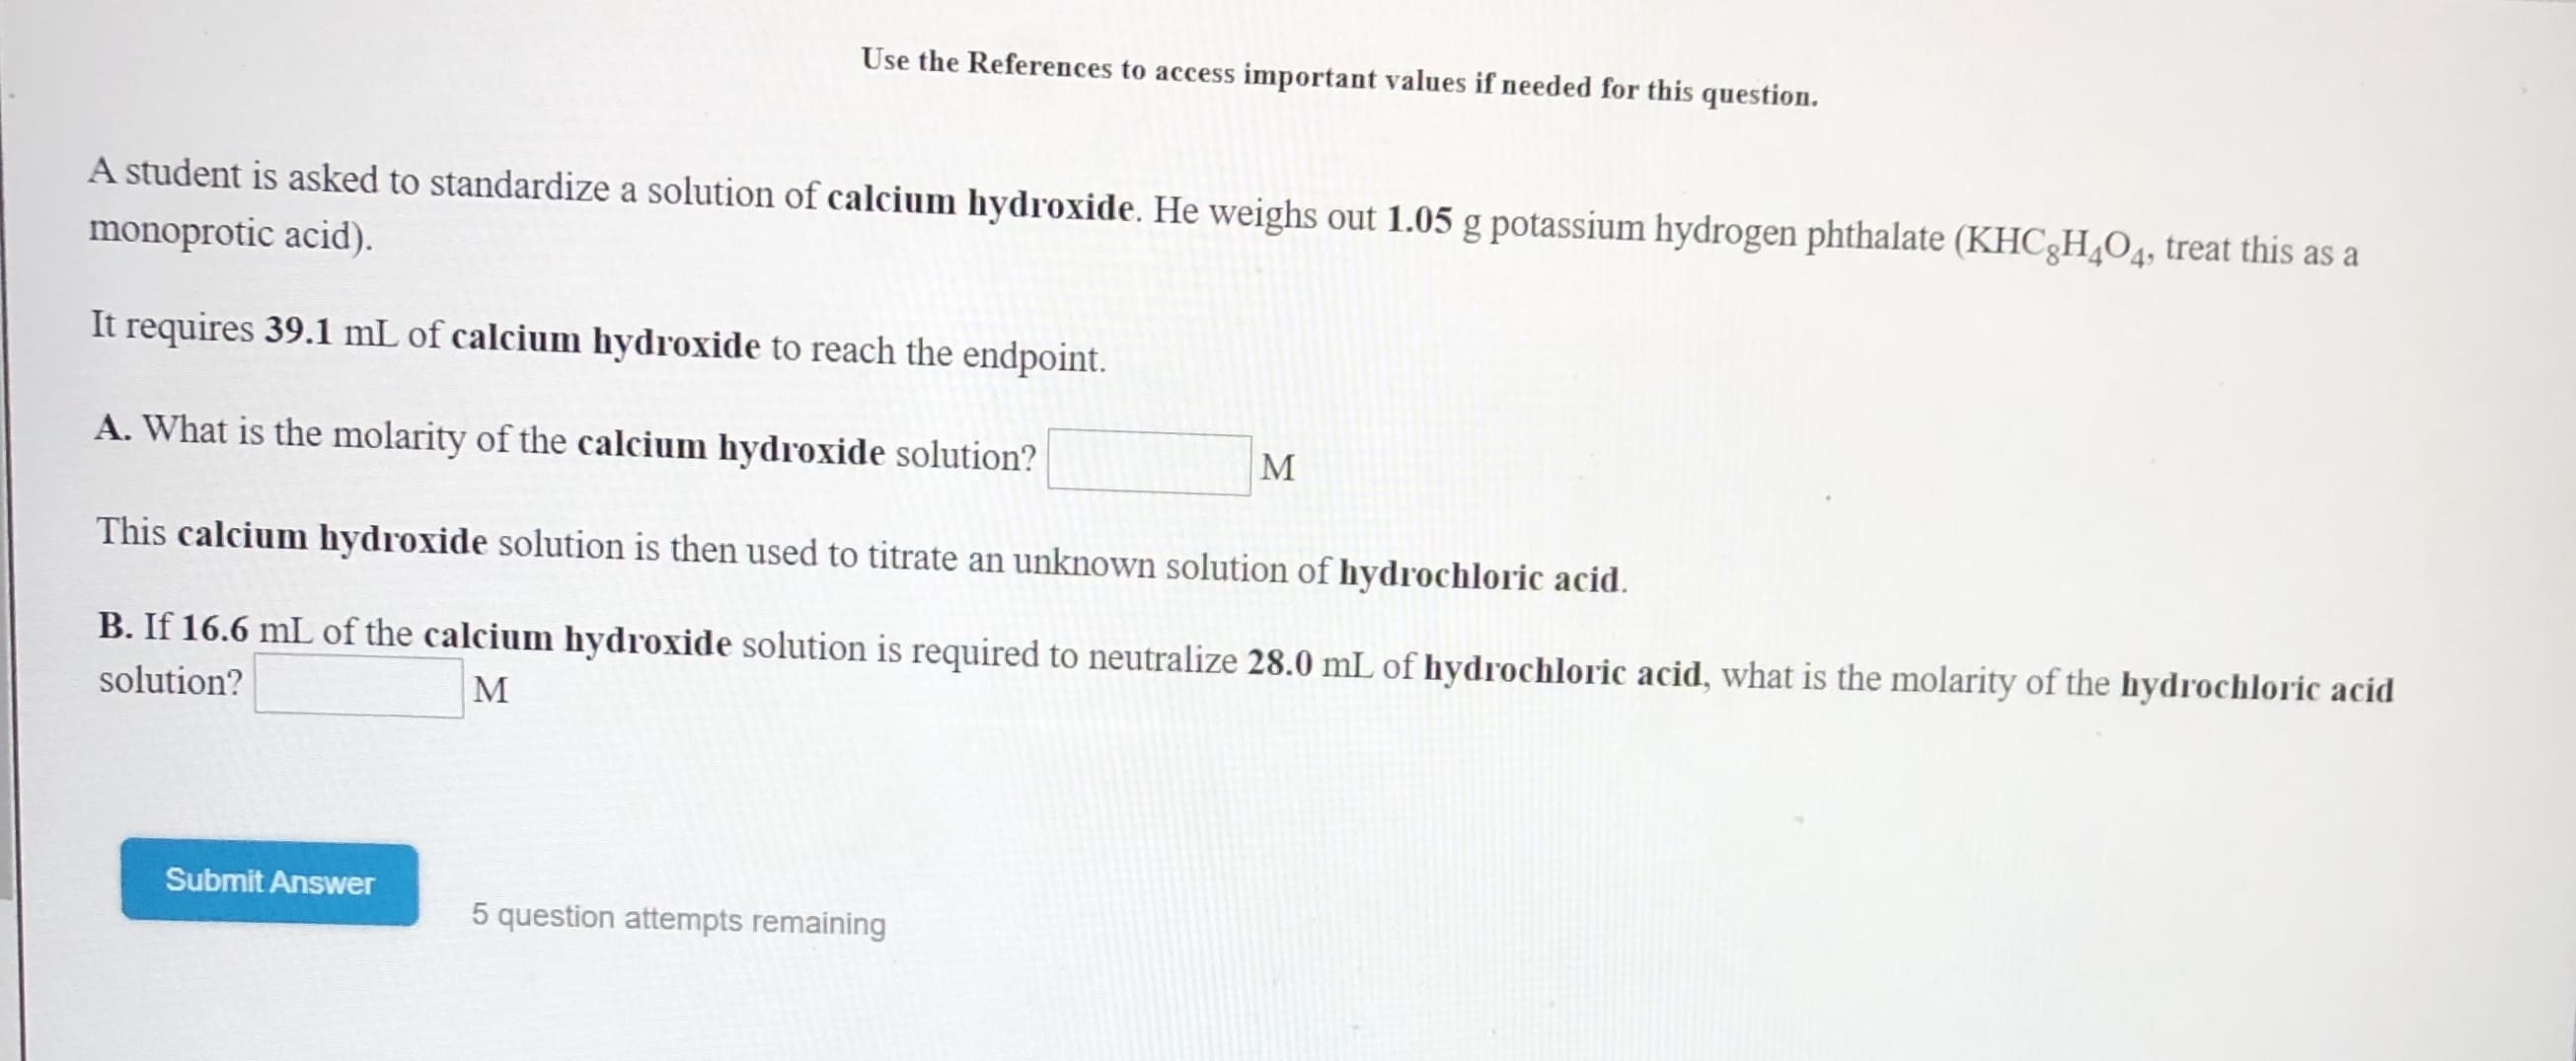 Use the References to access important values if needed for this question.
A student is asked to standardize a solution of calcium hydroxide. He weighs out 1.05 g potassium hydrogen phthalate (KHC8H O4, treat this as a
monoprotic acid)
It requires 39.1 mL of calcium hydroxide to reach the endpoint.
A. What is the molarity of the calcium hydroxide solution?
М
This calcium hydroxide solution is then used to titrate an unknown solution of hydrochloric acid
B. If 16.6 mL of the calcium hydroxide solution is required to neutralize 28.0 mL of hydrochloric acid, what is the molarity of the hydrochloric acid
solution?
М
Submit Answer
5 question attempts remaining
